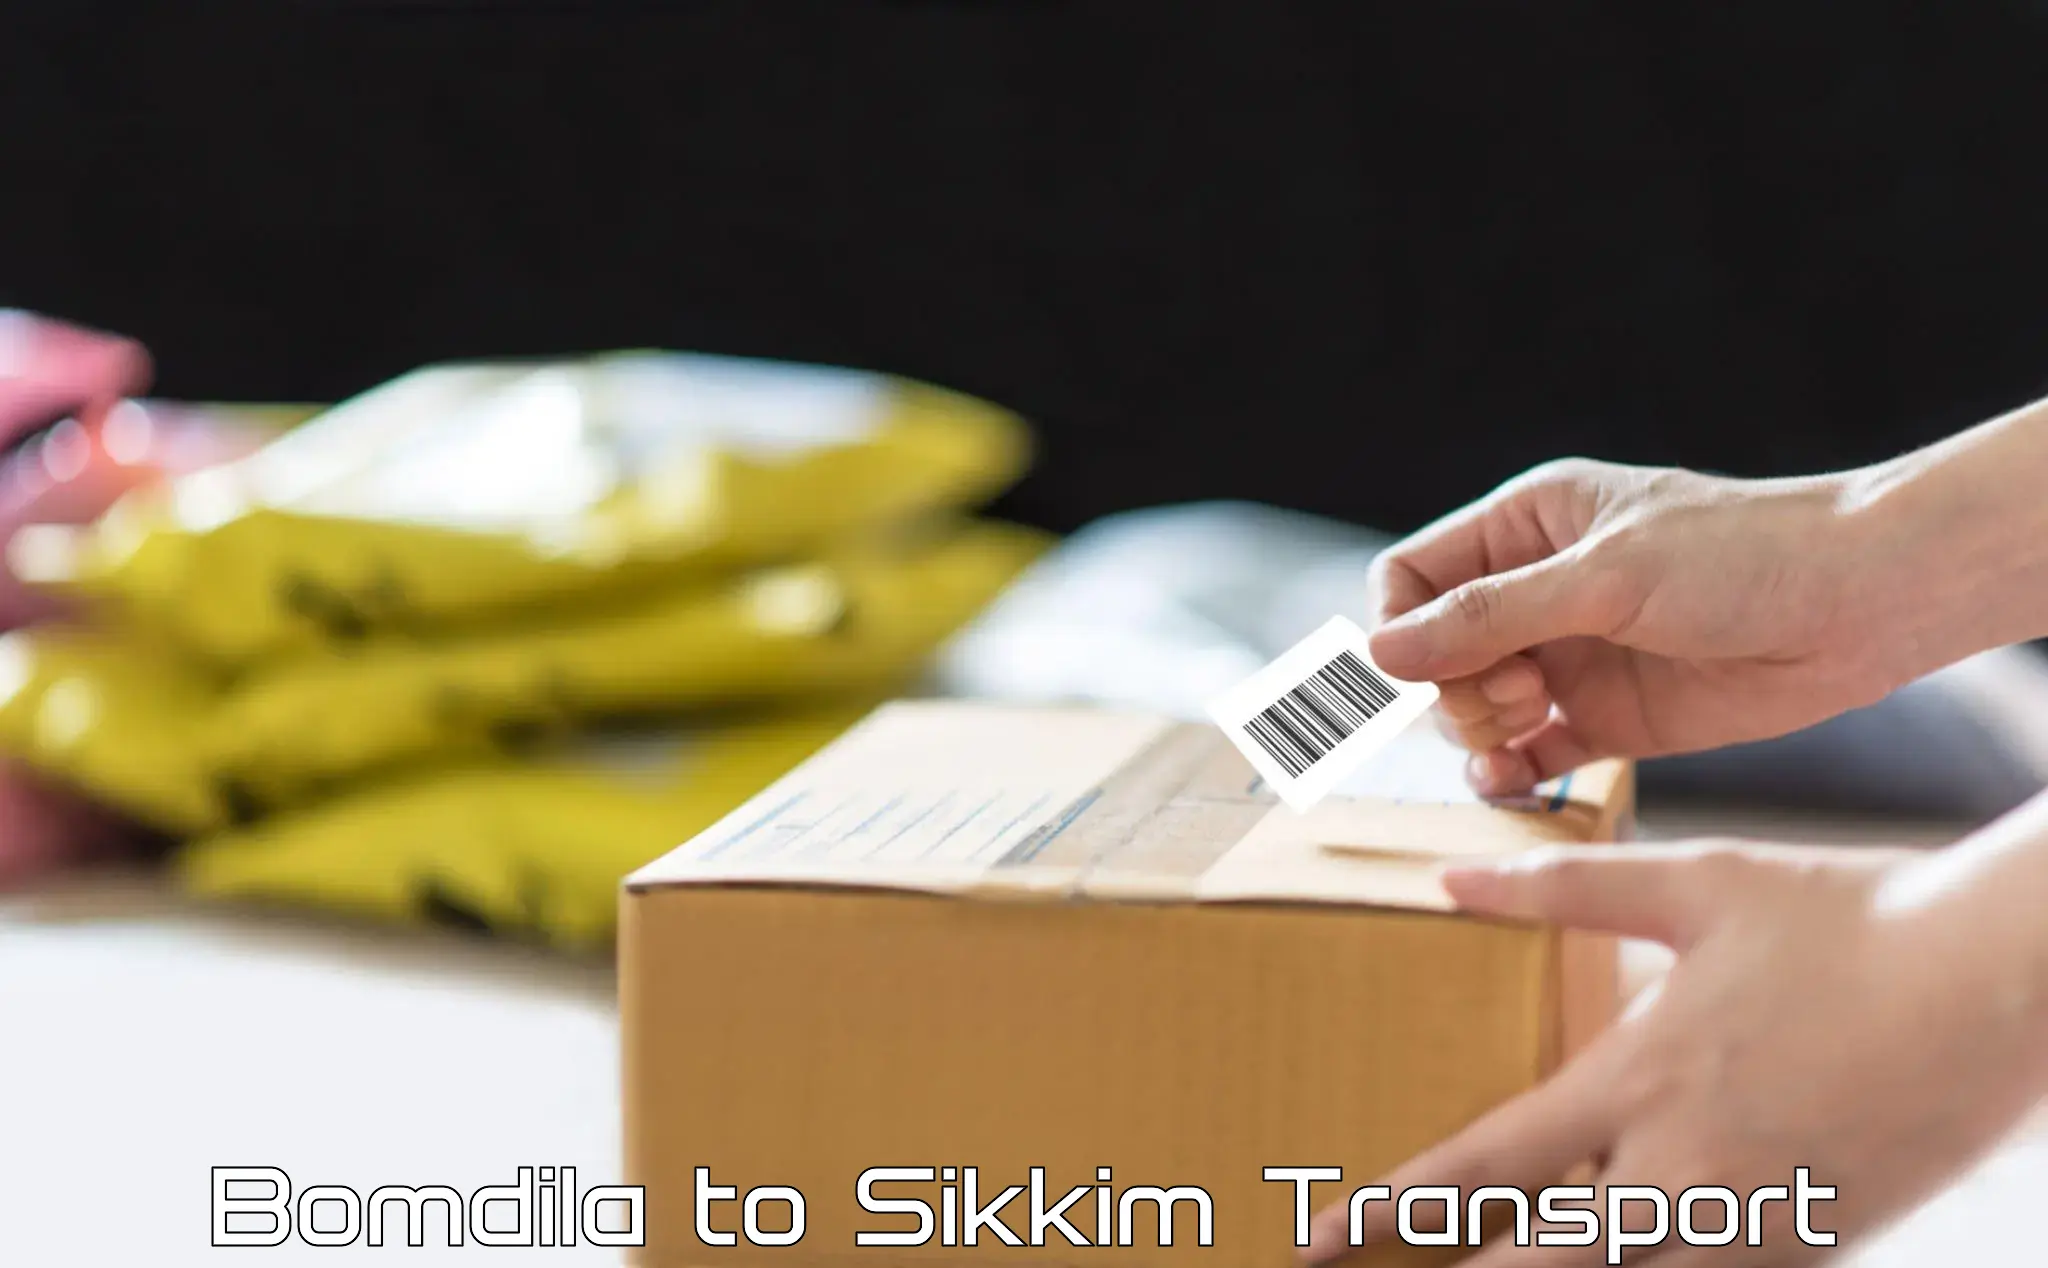 Truck transport companies in India Bomdila to North Sikkim